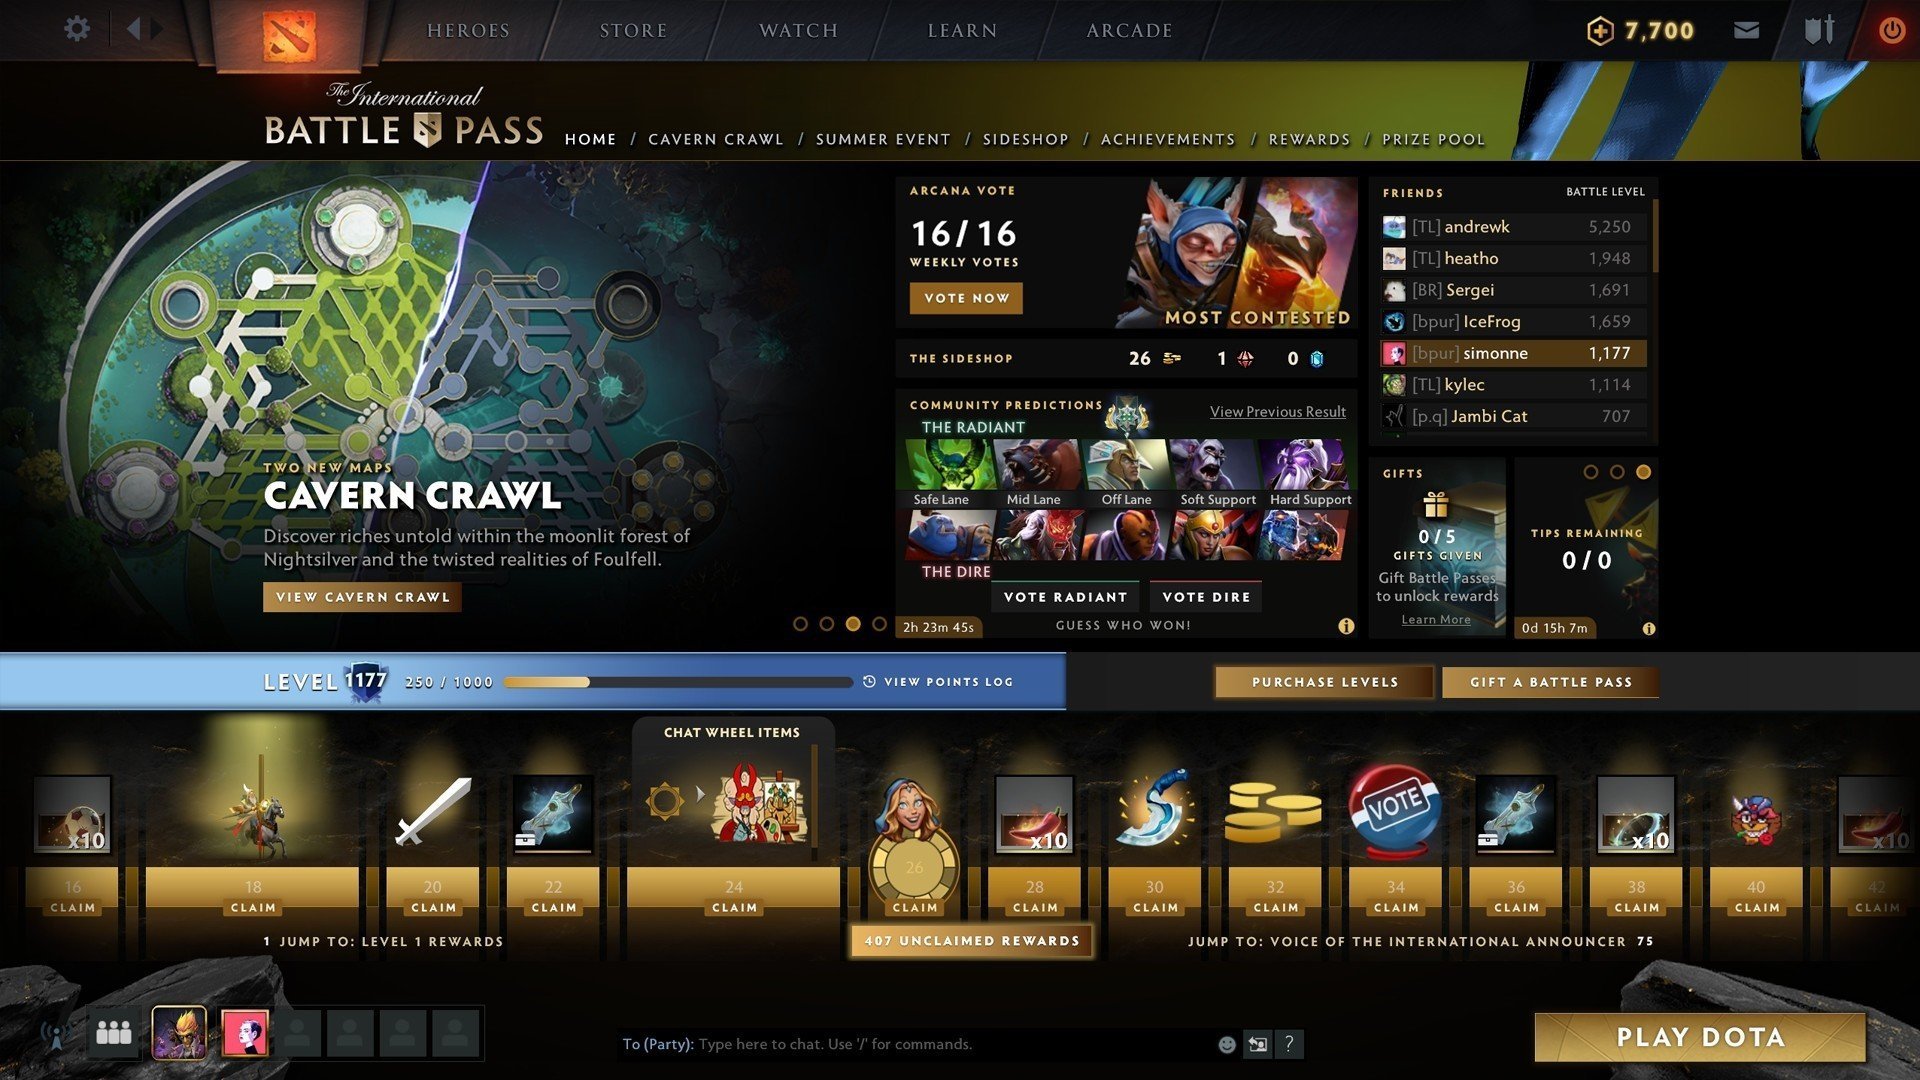 Dota 2 chat wheel to all фото 86